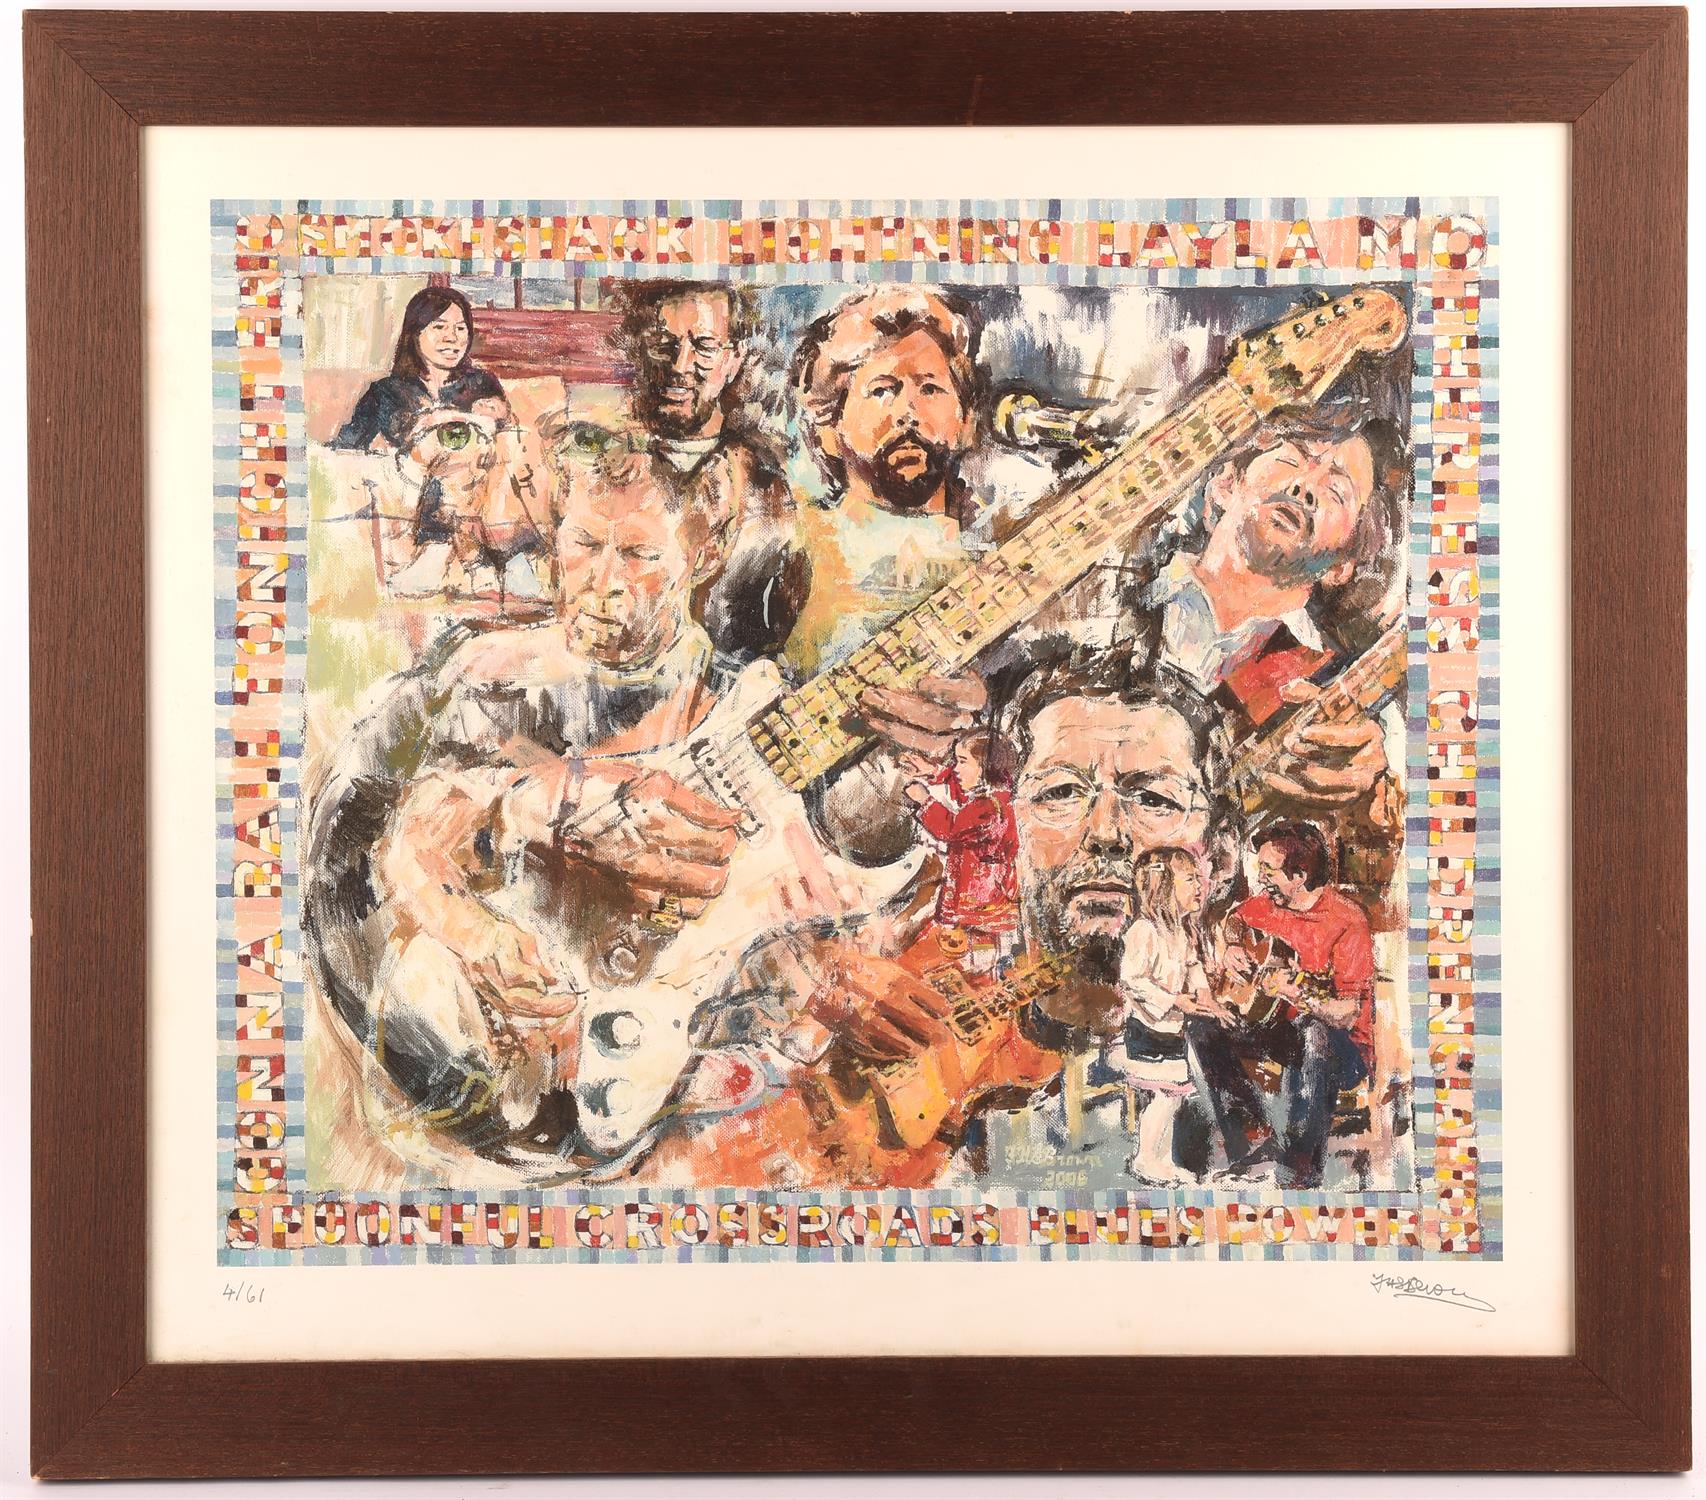 Eric Clapton - Print Signed by the artist Frank Brown, Limited edition number 4/61,